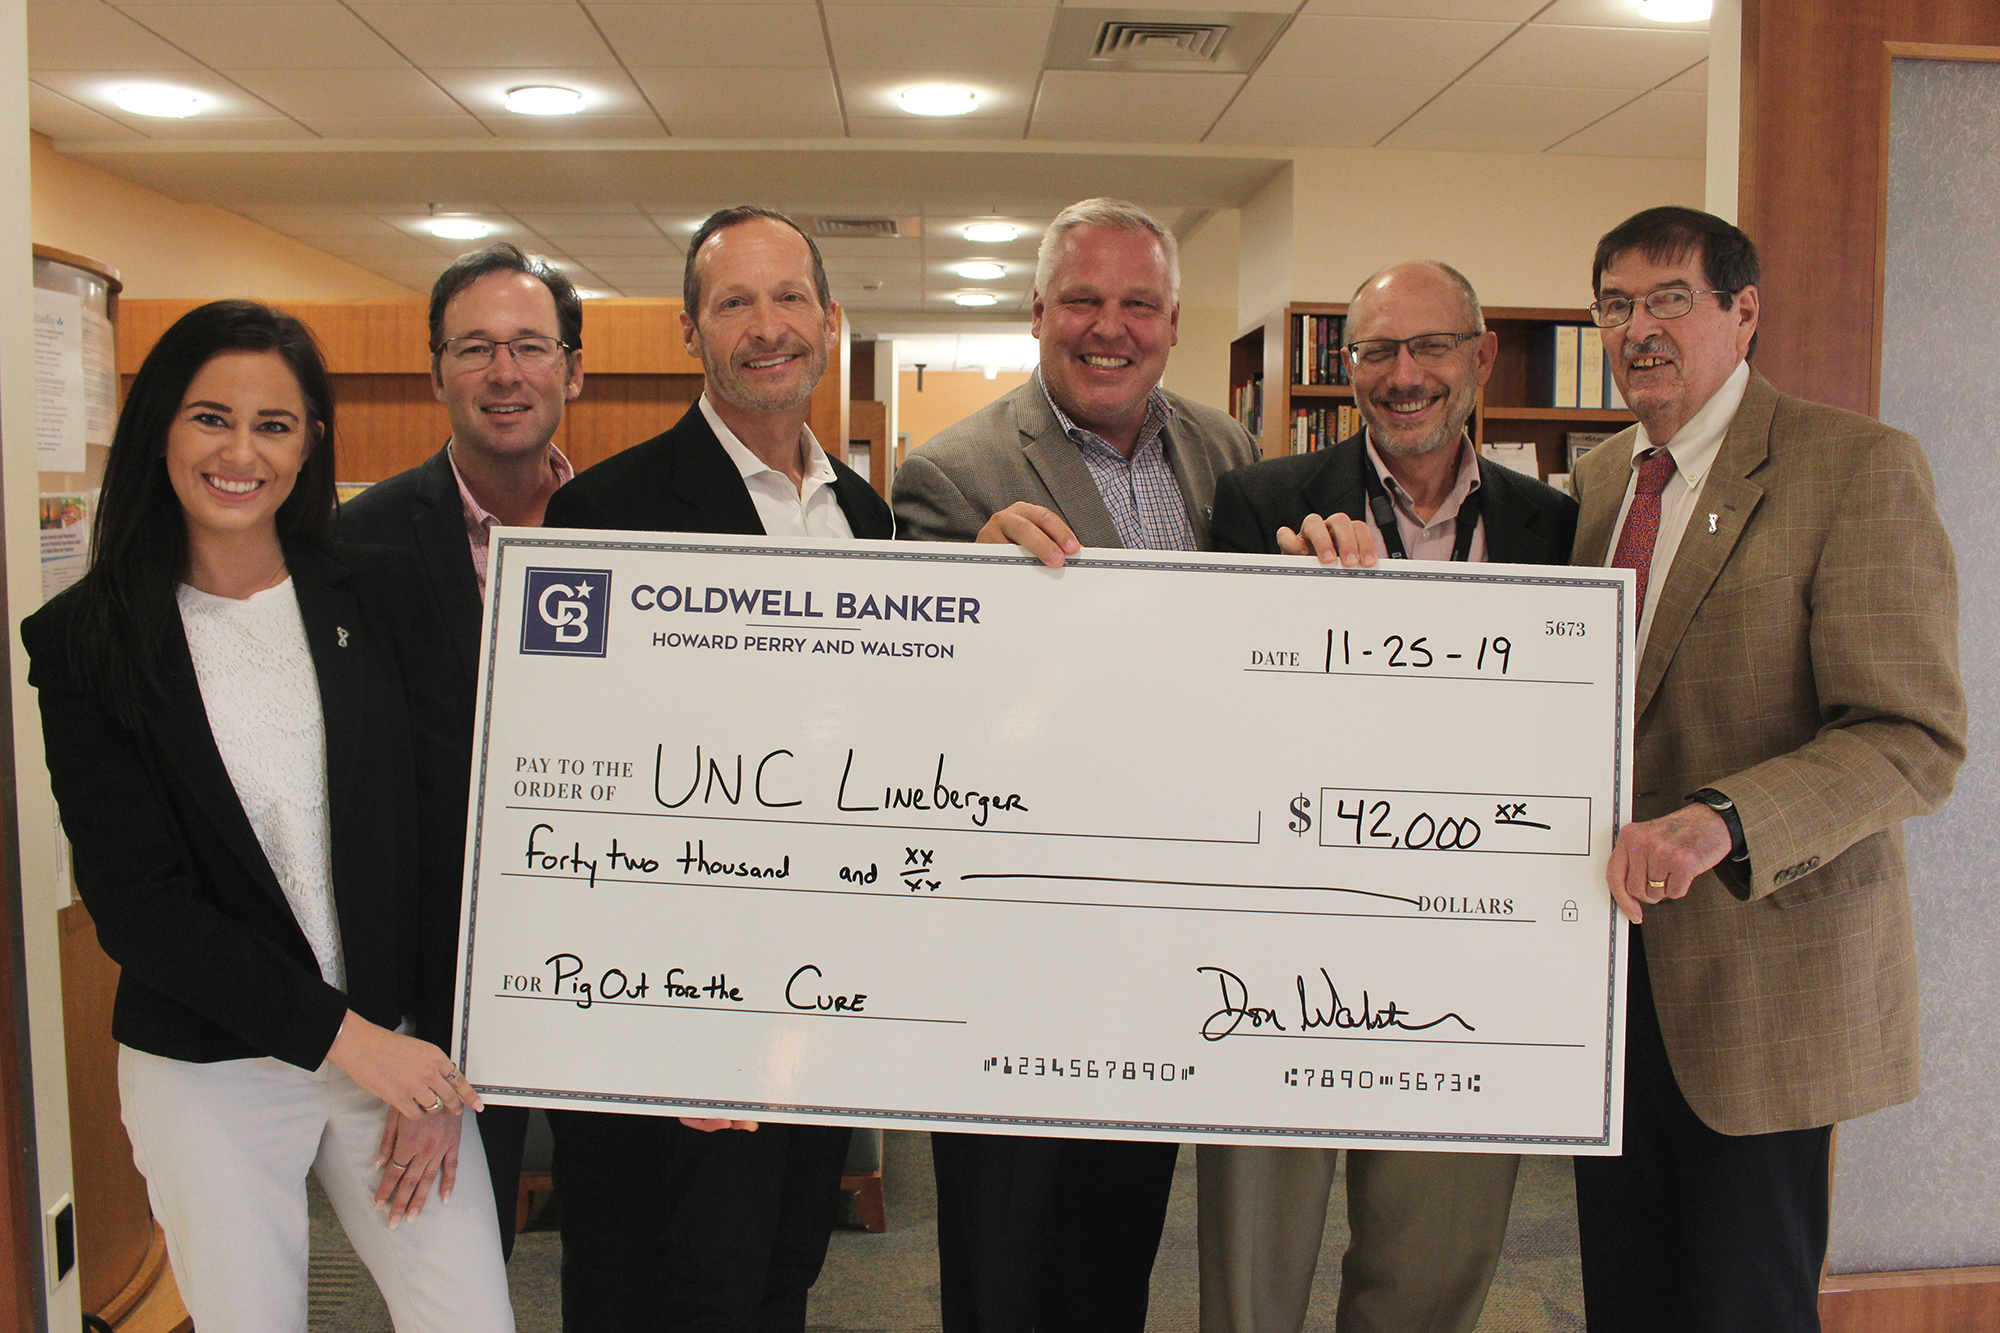 Coldwell Banker Howard Perry and Walston real estate agents presenting a check for $42,000 to the UNC Lineberger Comprehensive Cancer Support Program